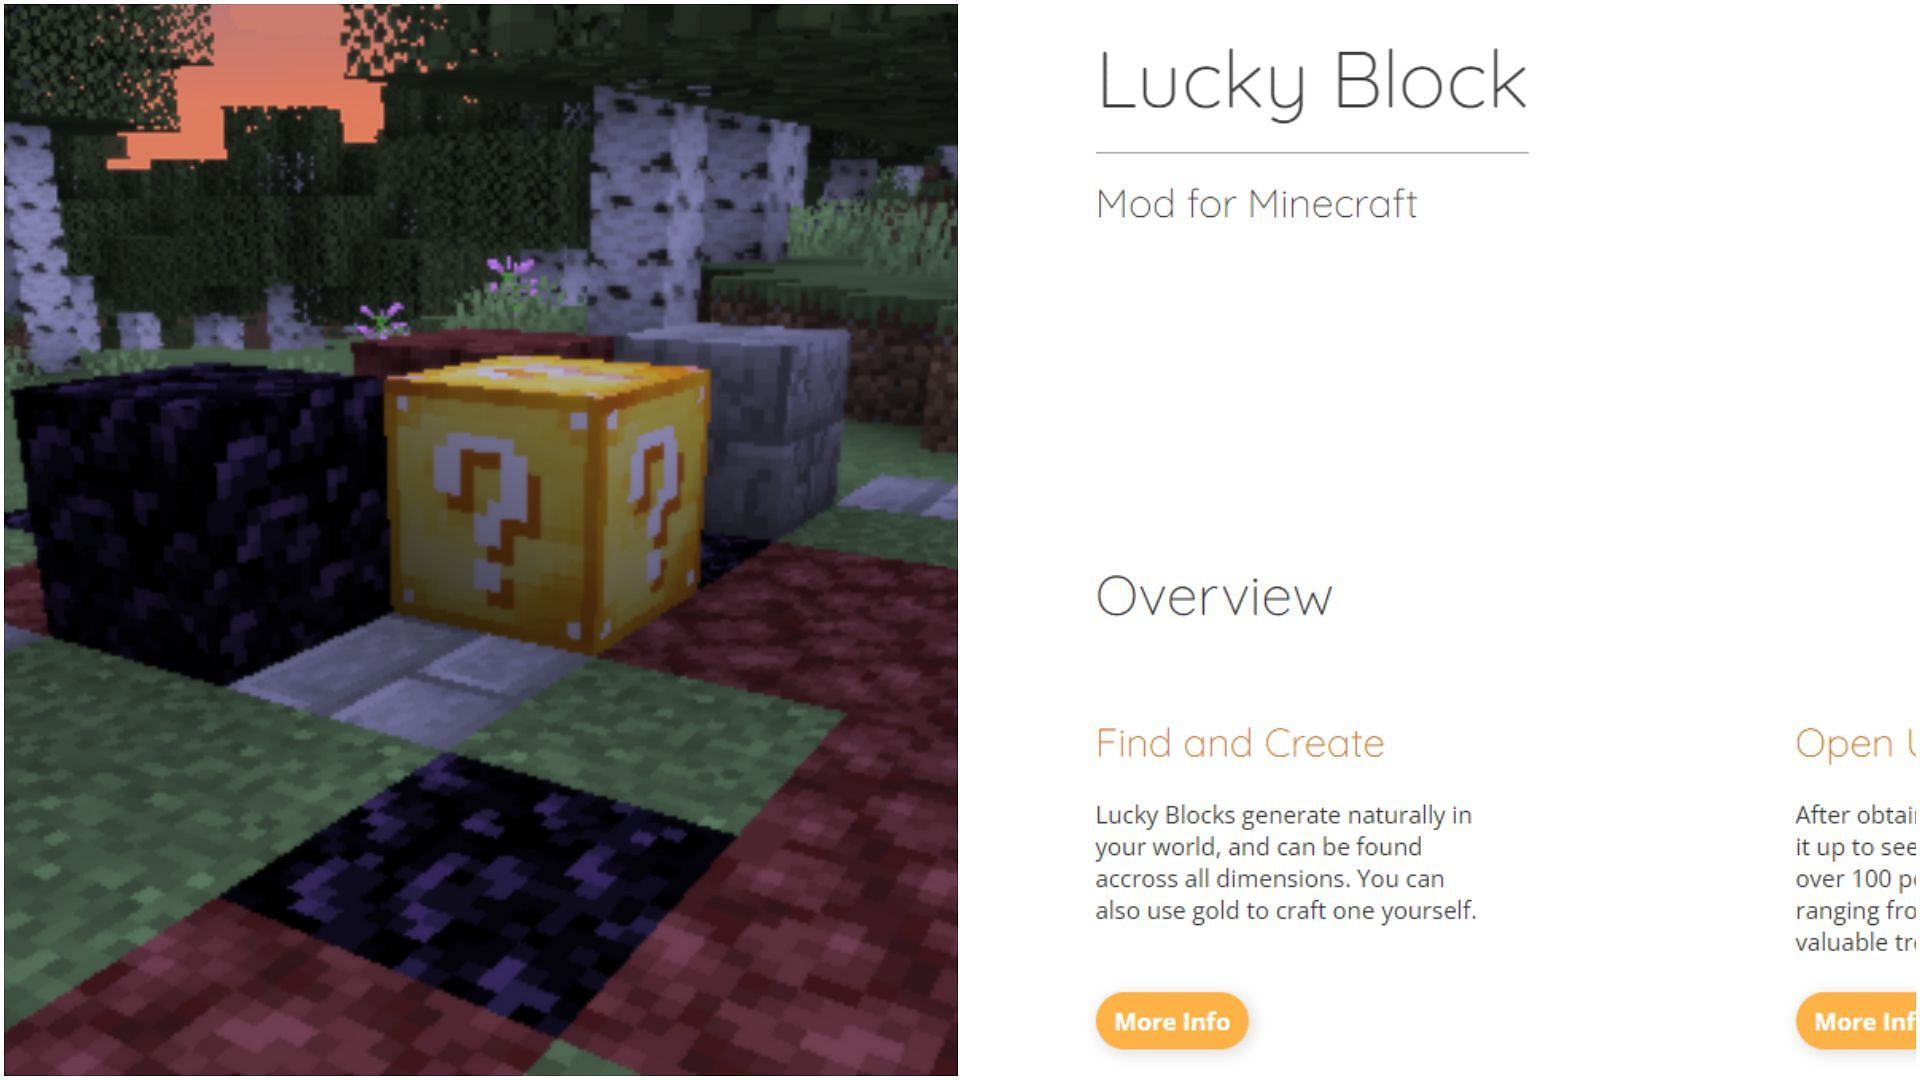 How To Download & Install the Lucky Block Mod in Minecraft 1.16.1